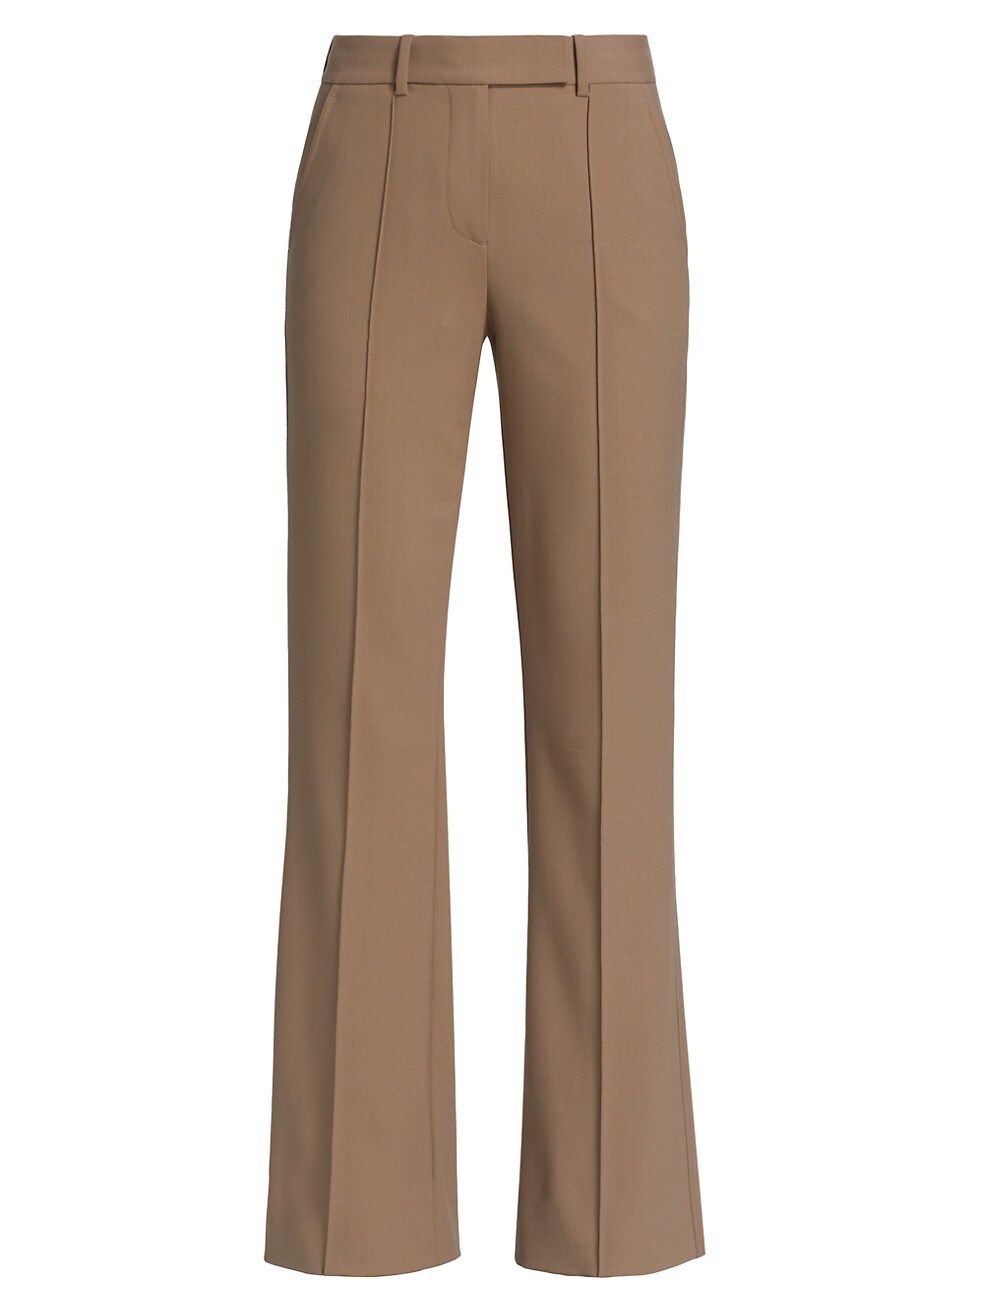 Helmut Lang High-Waisted Stretch Trousers | Saks Fifth Avenue